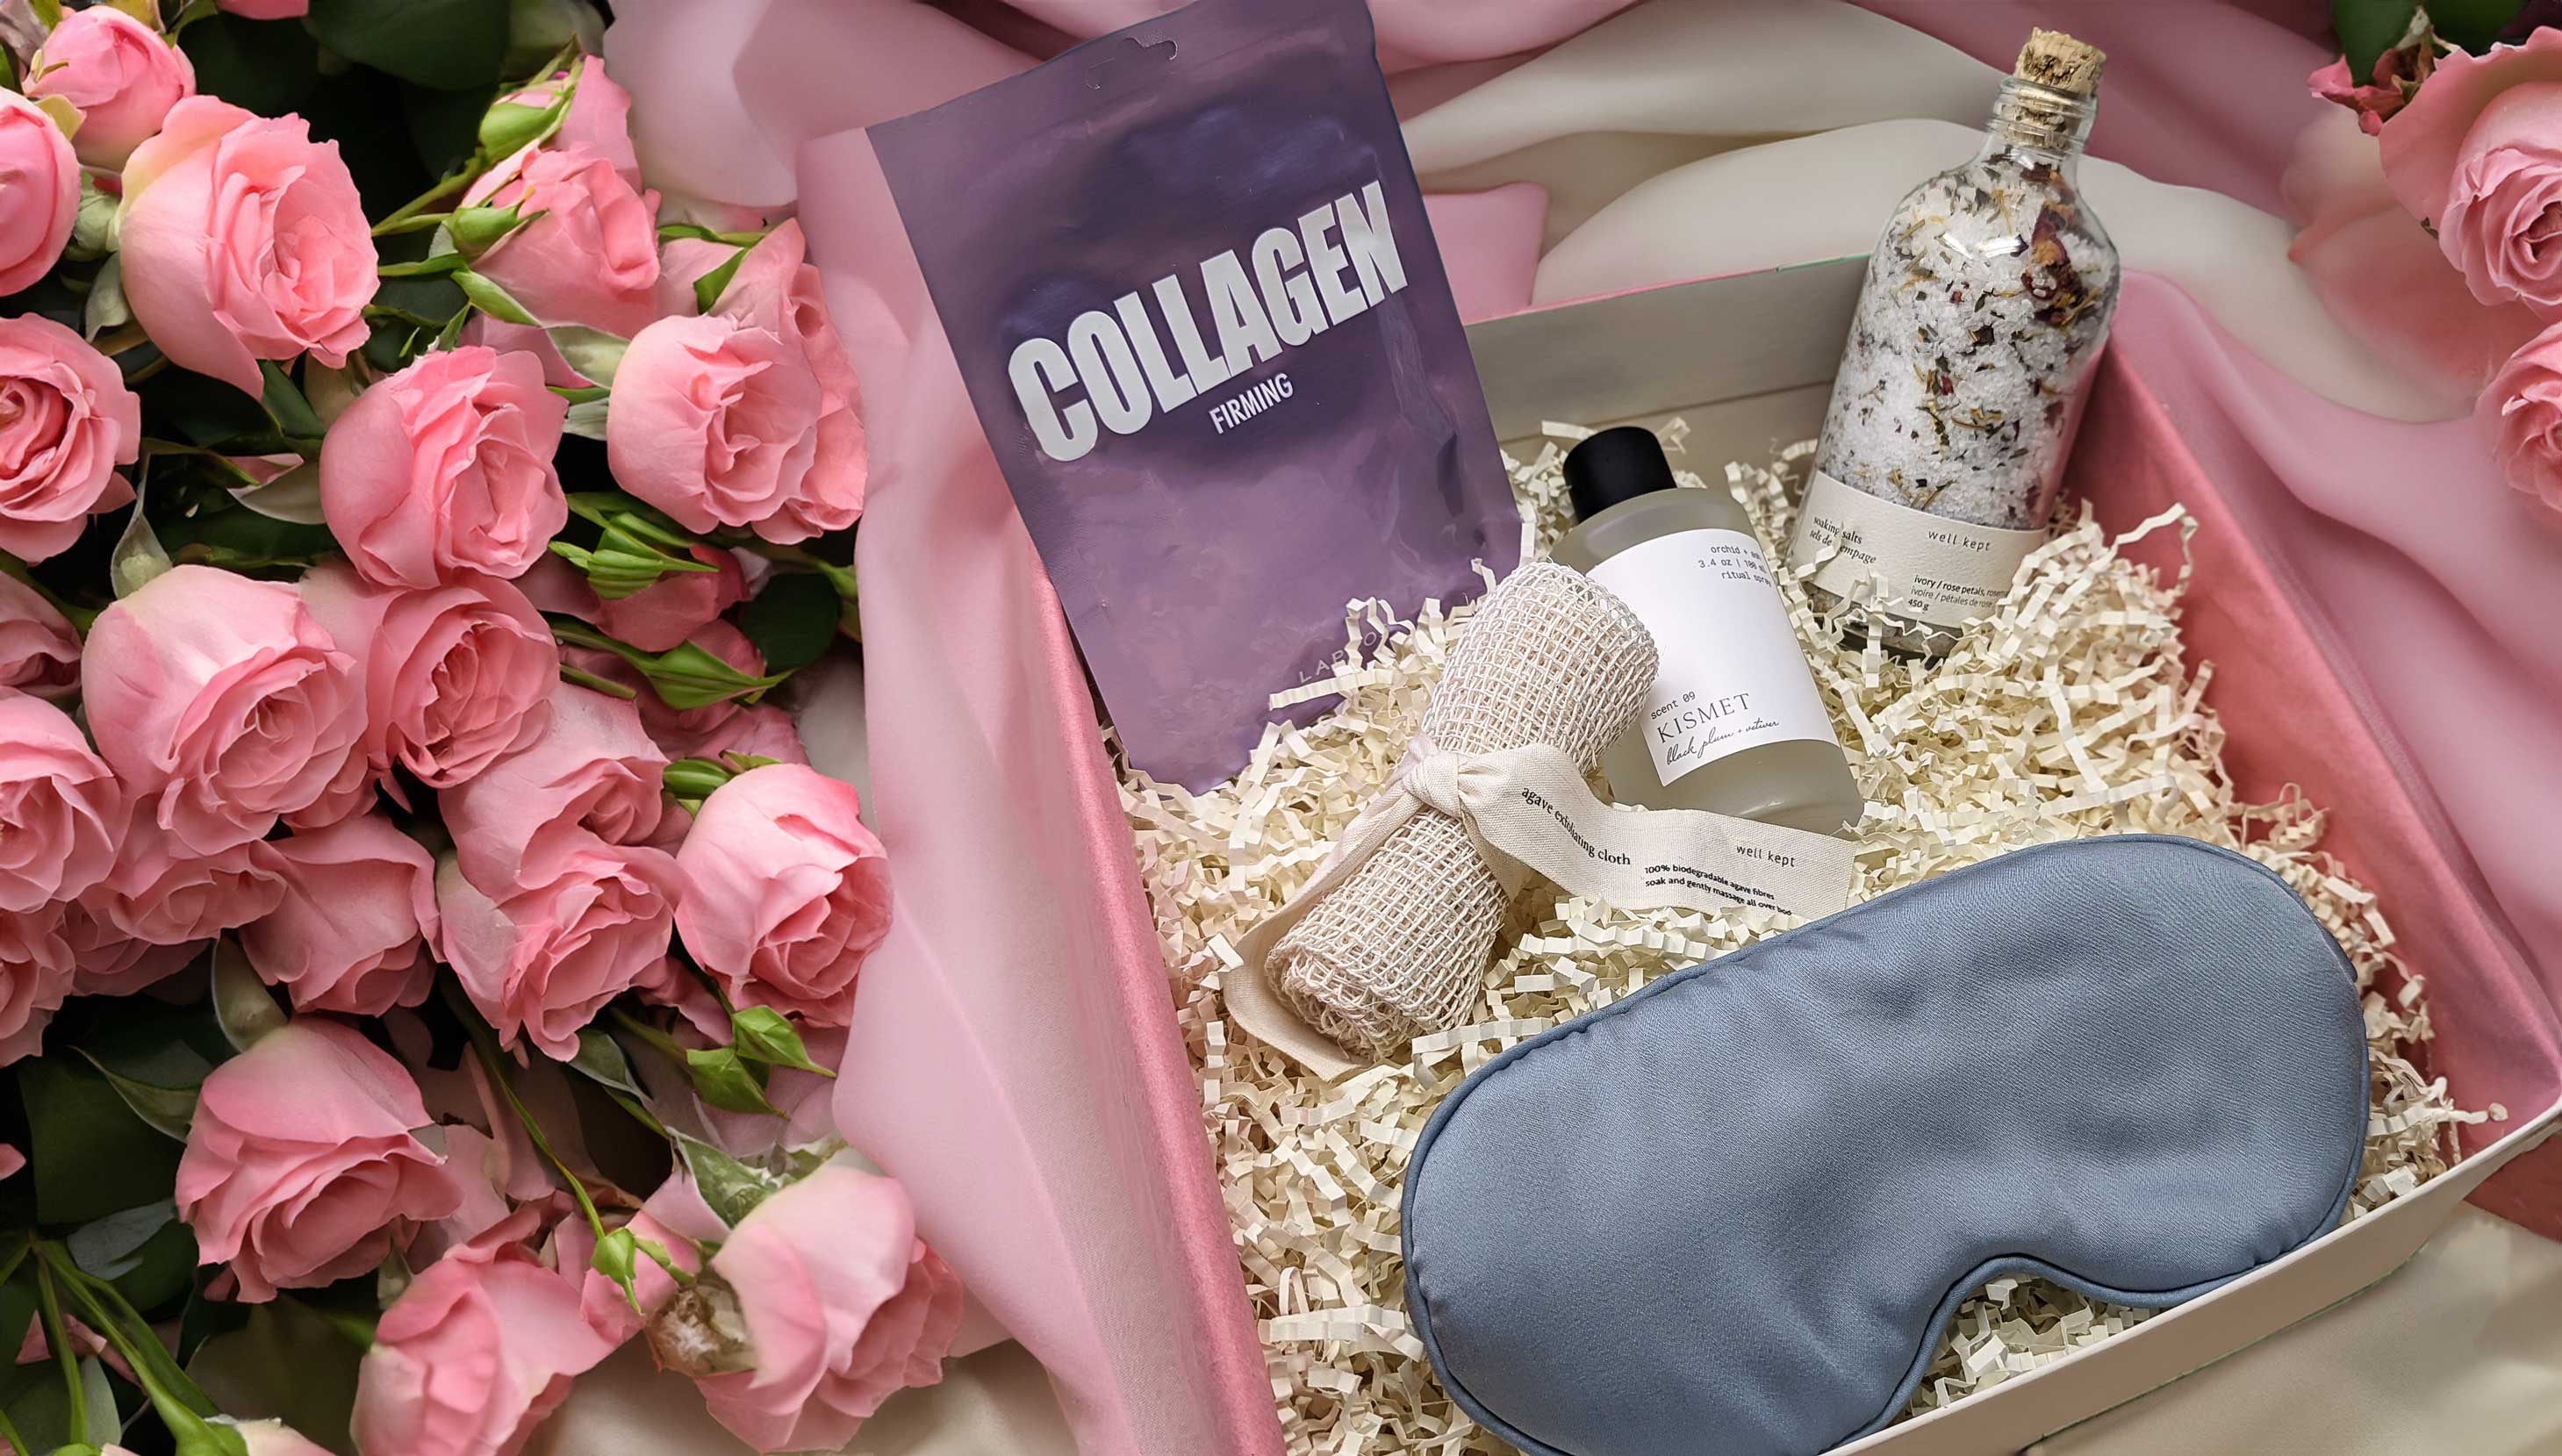 Gift box on pink cloth and pink roses. In the box is crinkle paper a sleep mask, bath salt, scrub cloth, a purple collagen firming pouch, and perfume